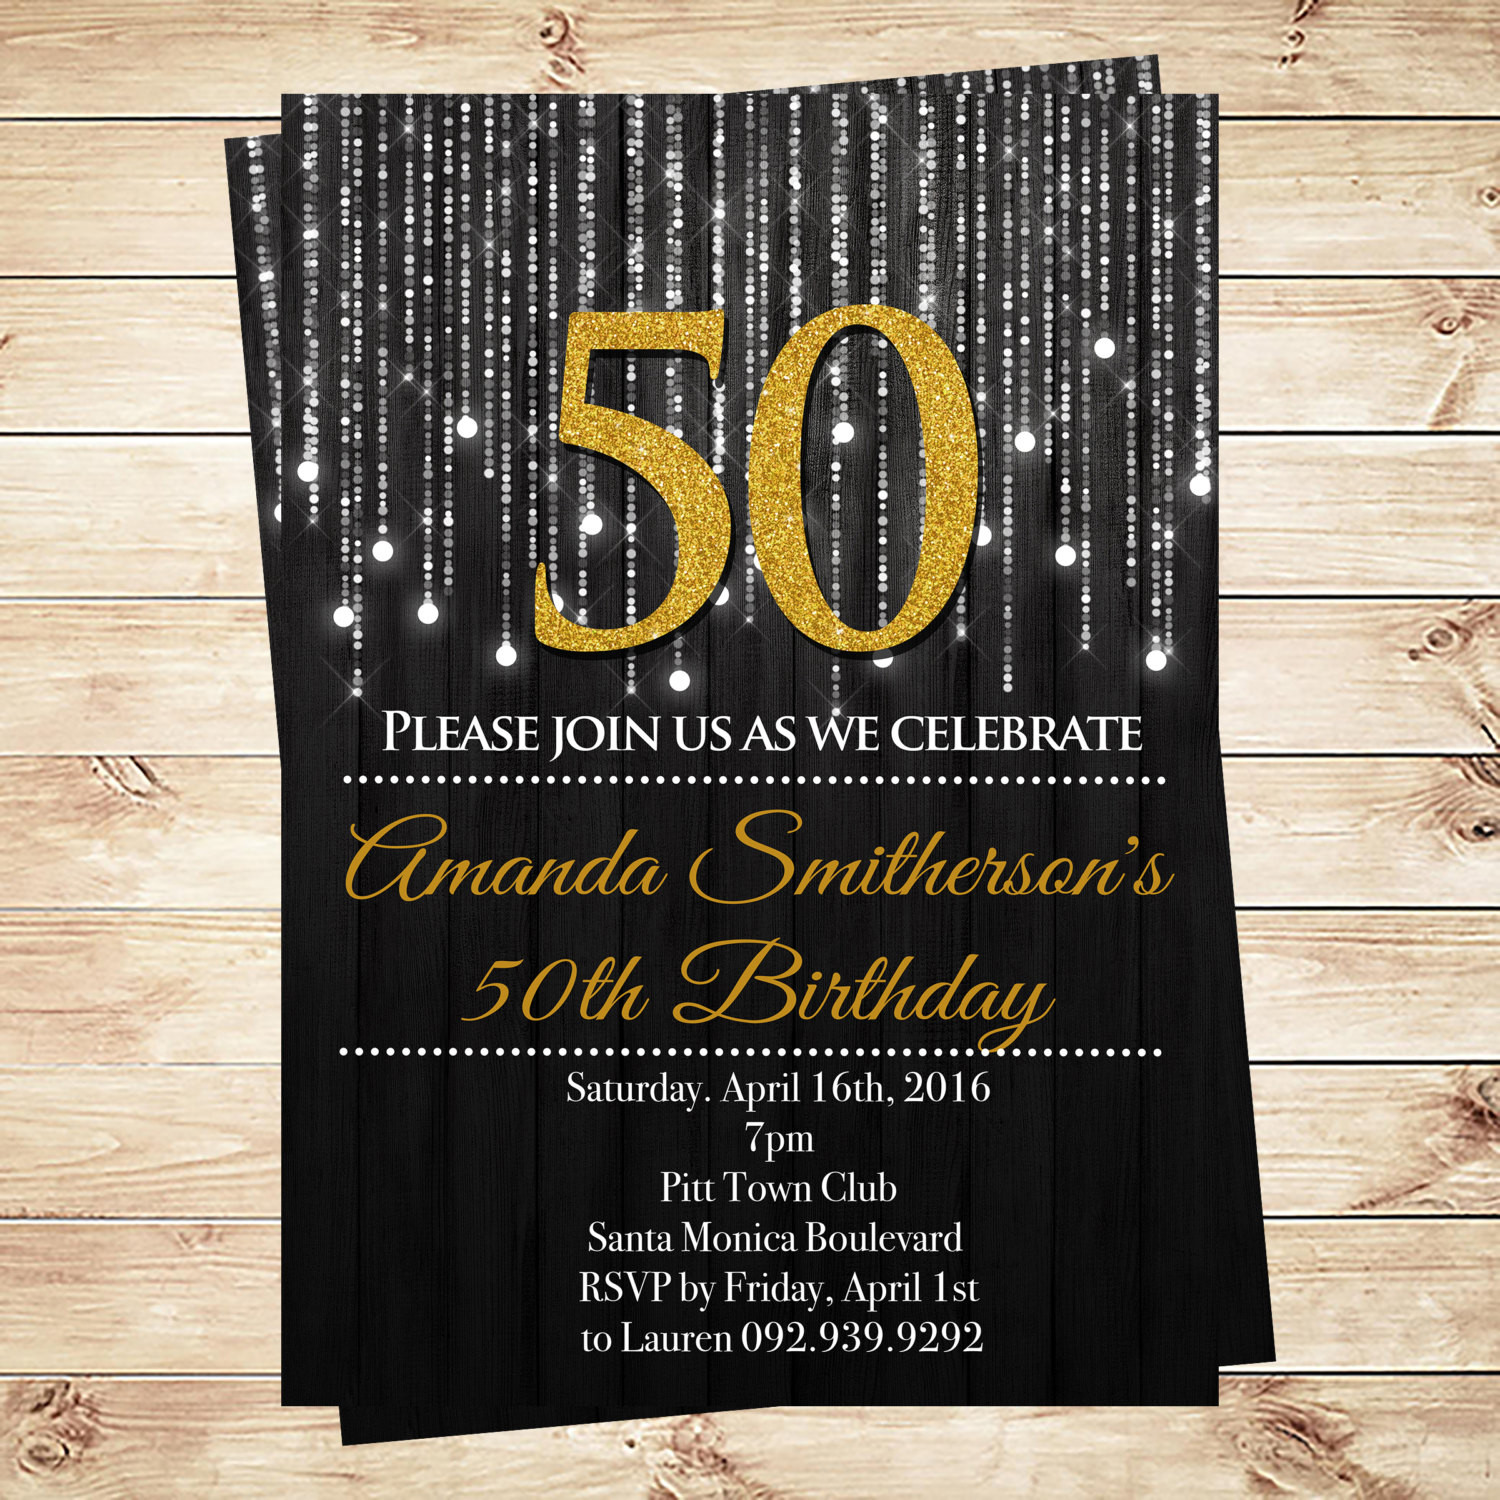 Invitations For 50th Birthday
 Gold And Black 50th Birthday Invitations and by